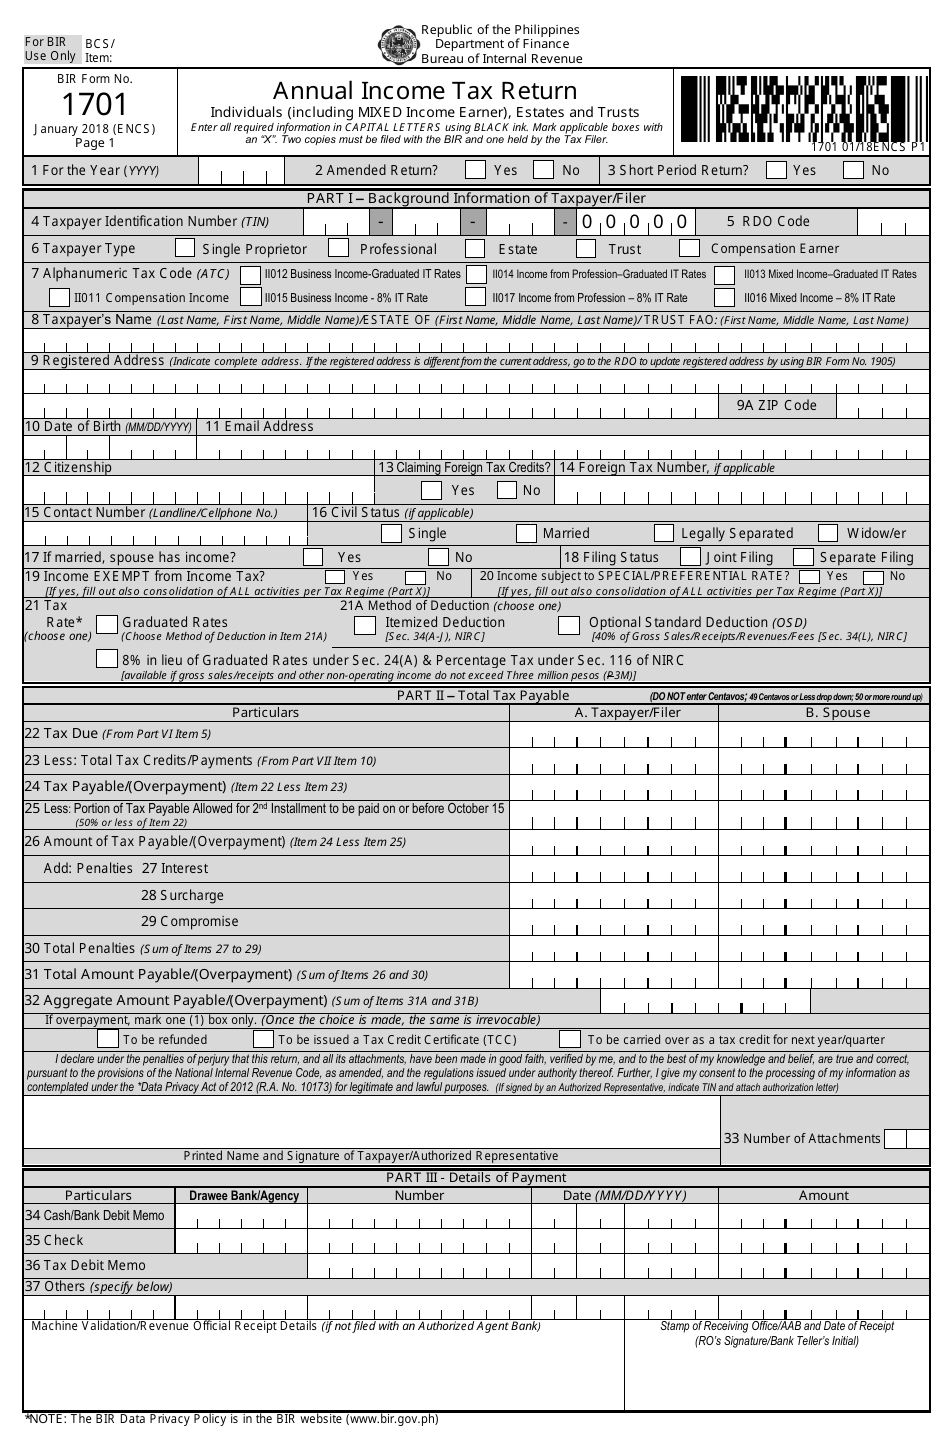 BIR Form 1701 Annual Income Tax Return - Philippines, Page 1